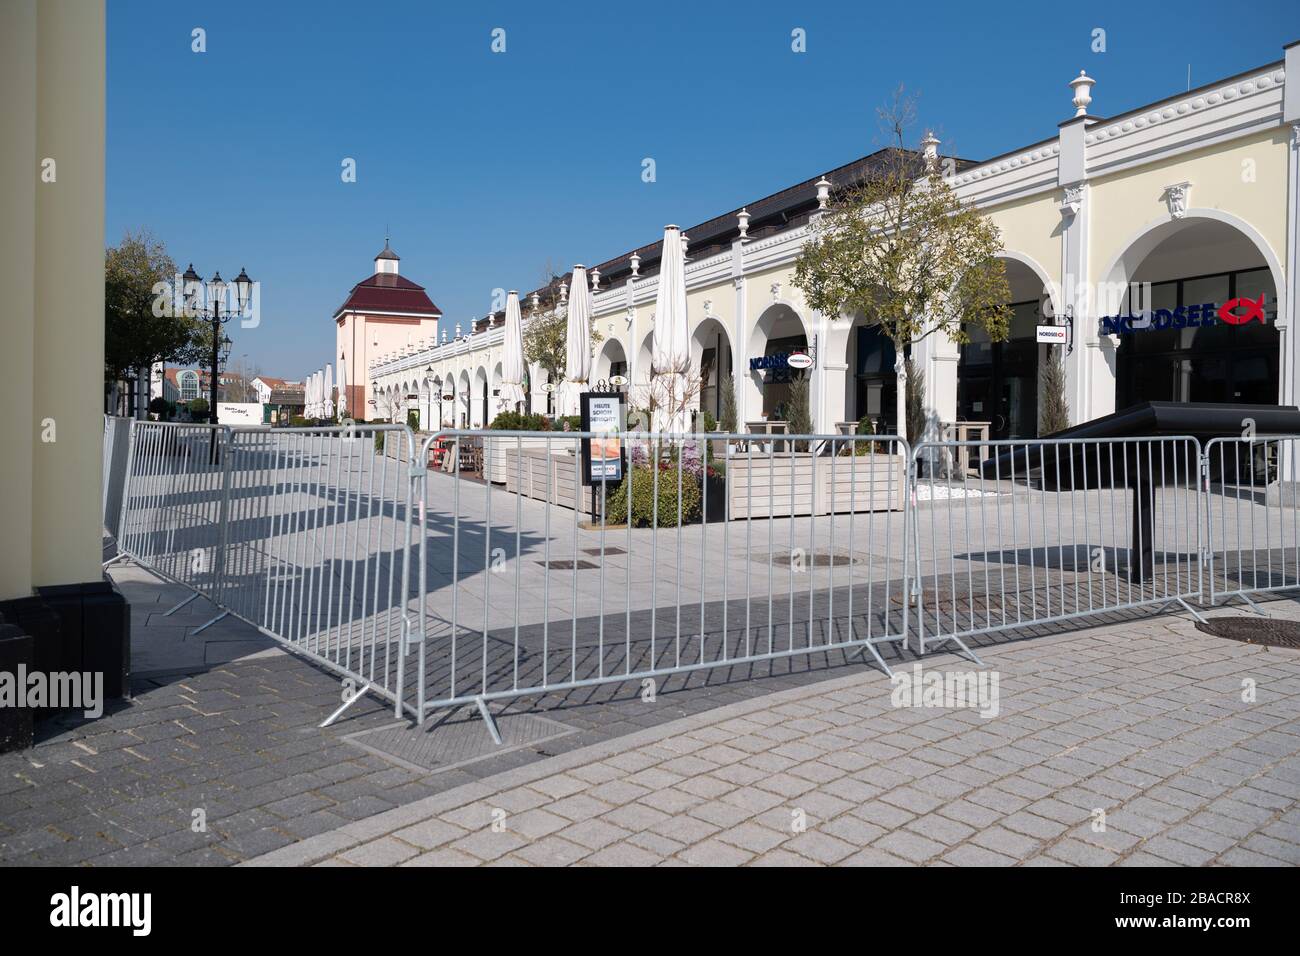 Designer Outlet Berlin High Resolution Stock Photography and Images - Alamy